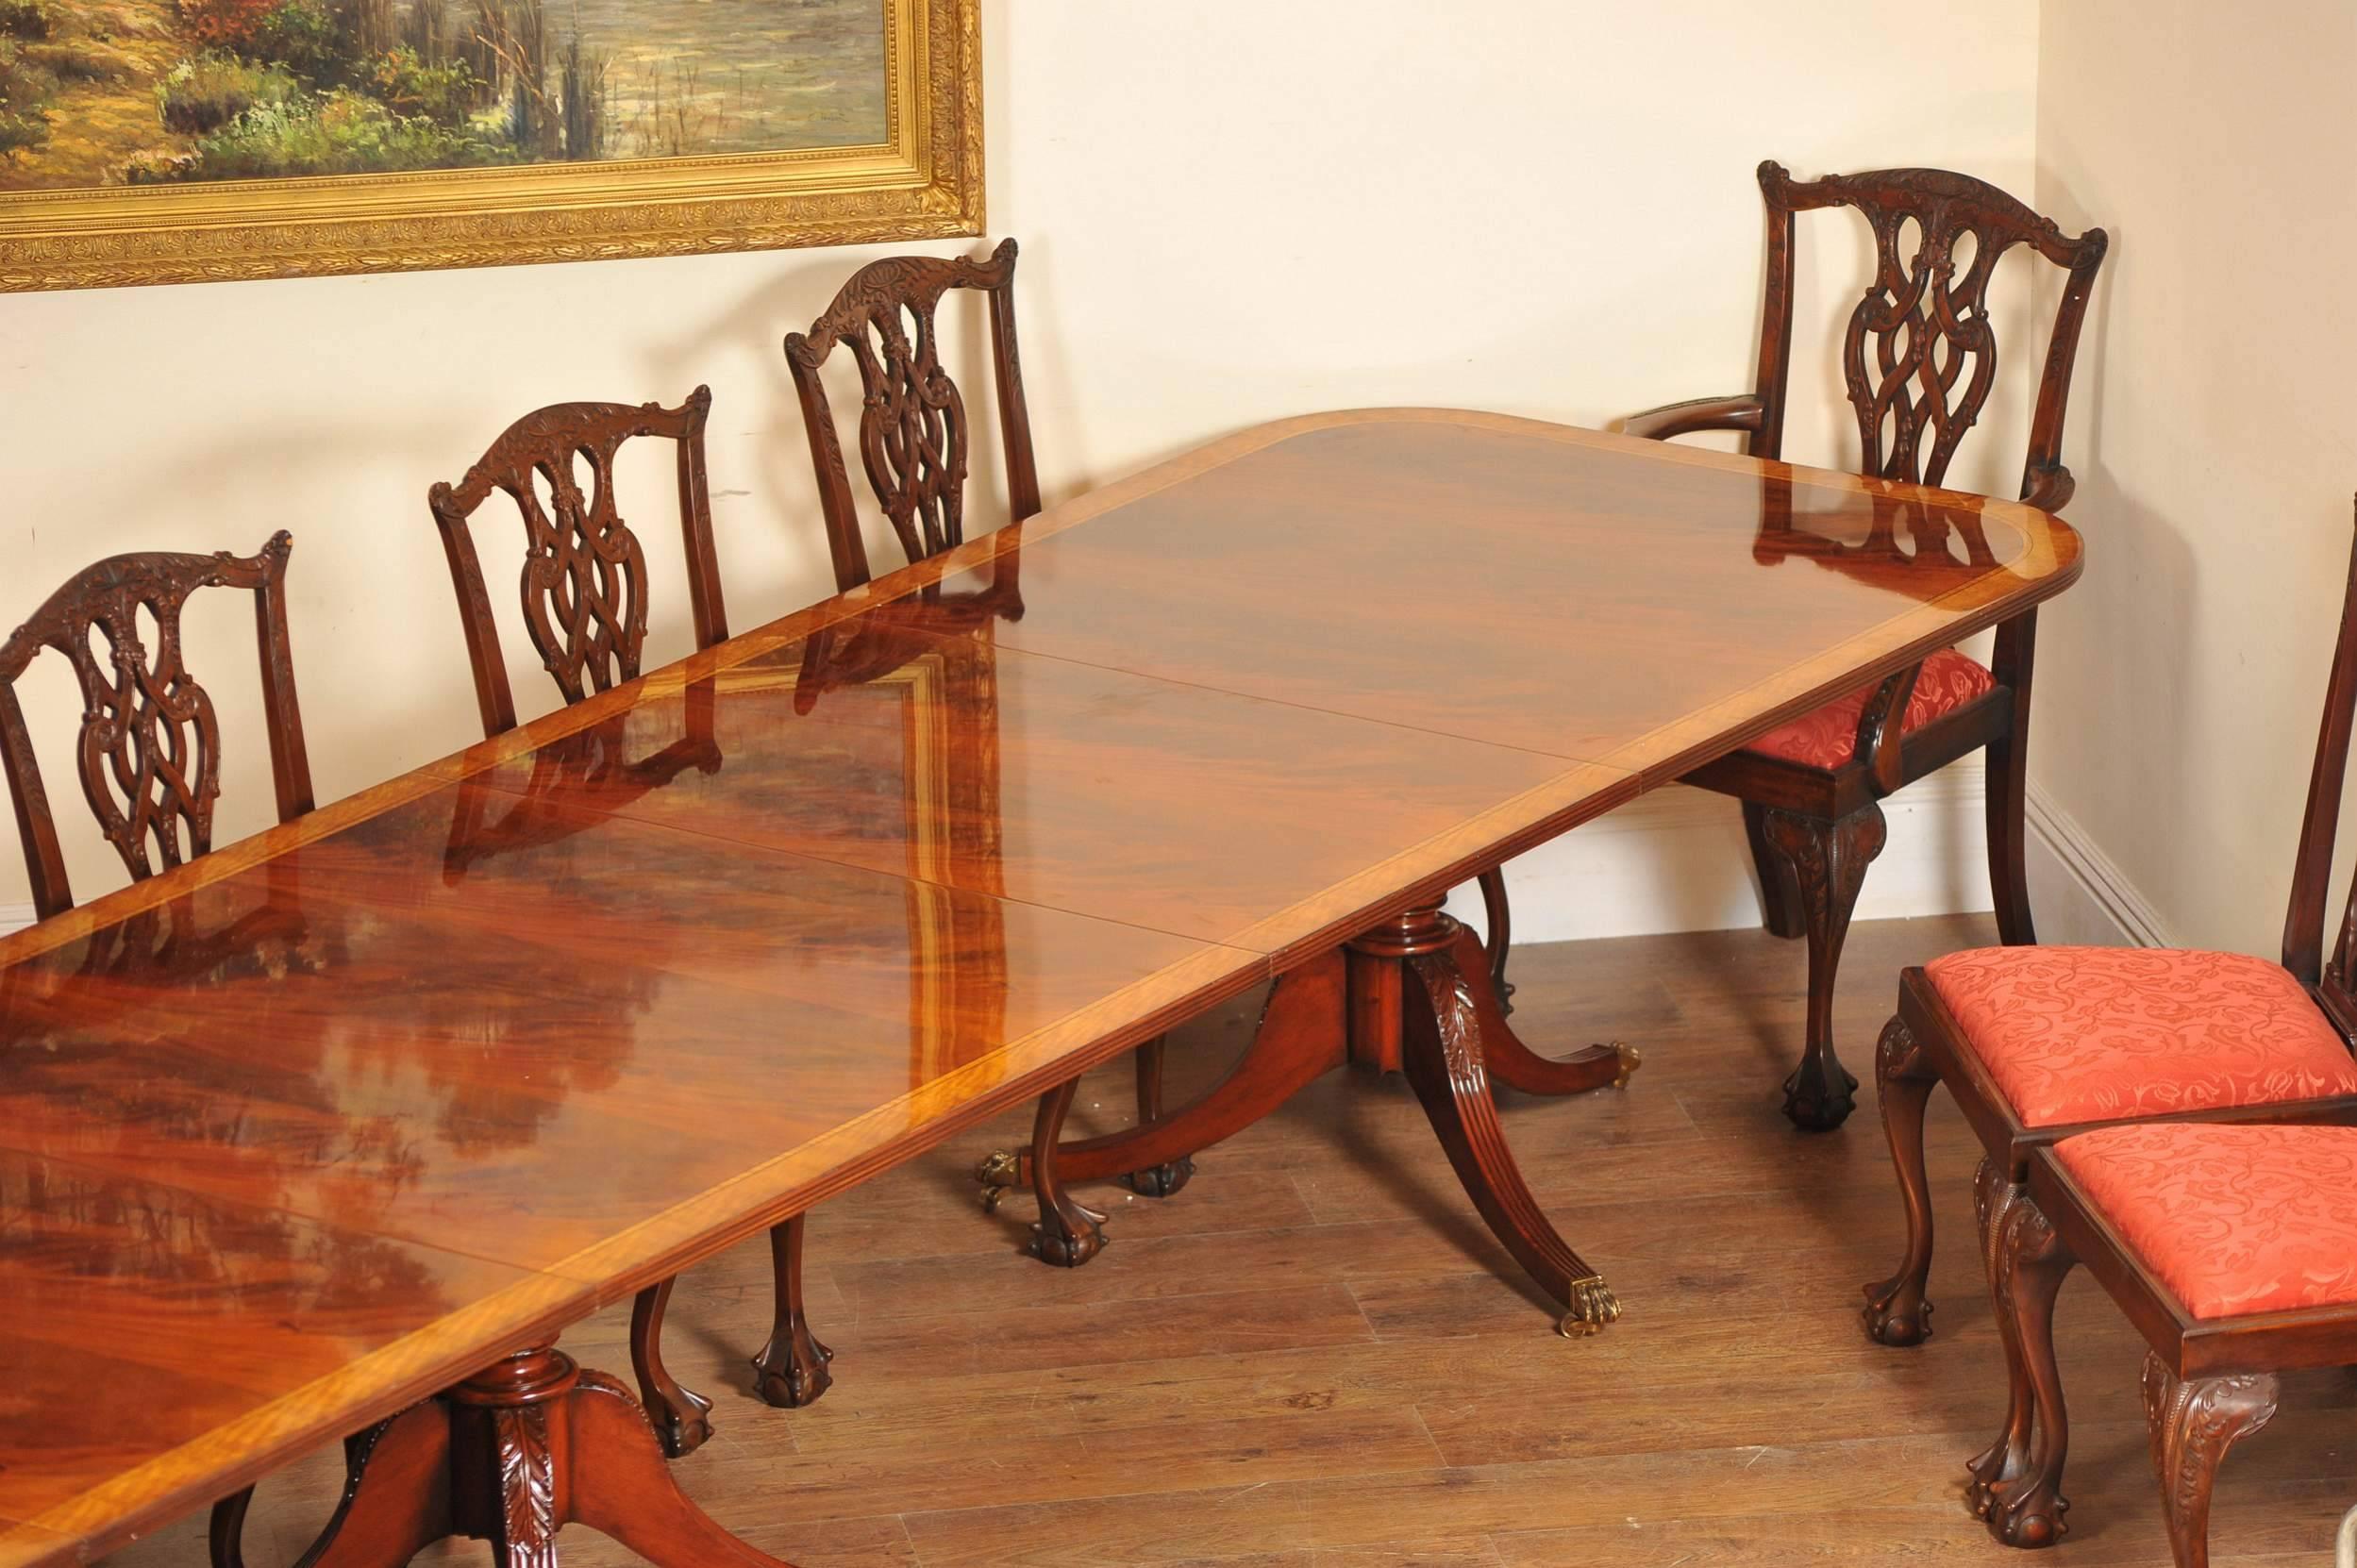 Regency style pedestal dining table in mahogany with satinwood crossbanding.
Come view this for yourself in our Hertfordshire warehouse.
Matching set of ten mahogany Chippendale style dining chairs, two arms and eight side chairs.
Very